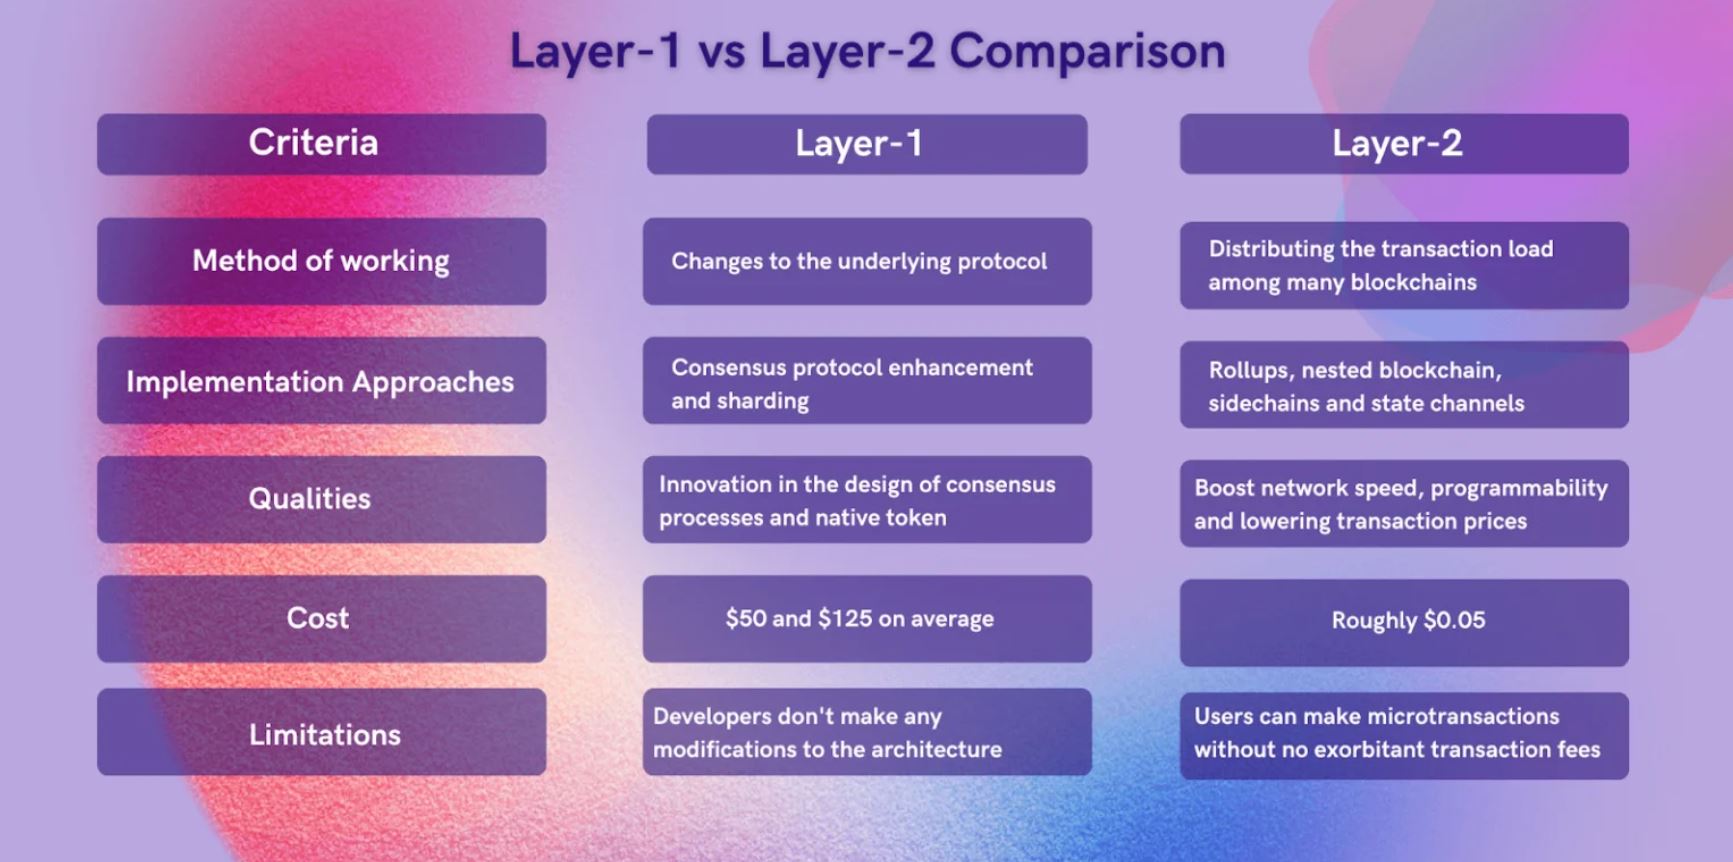 Differences between Layer 1 and Layer 2